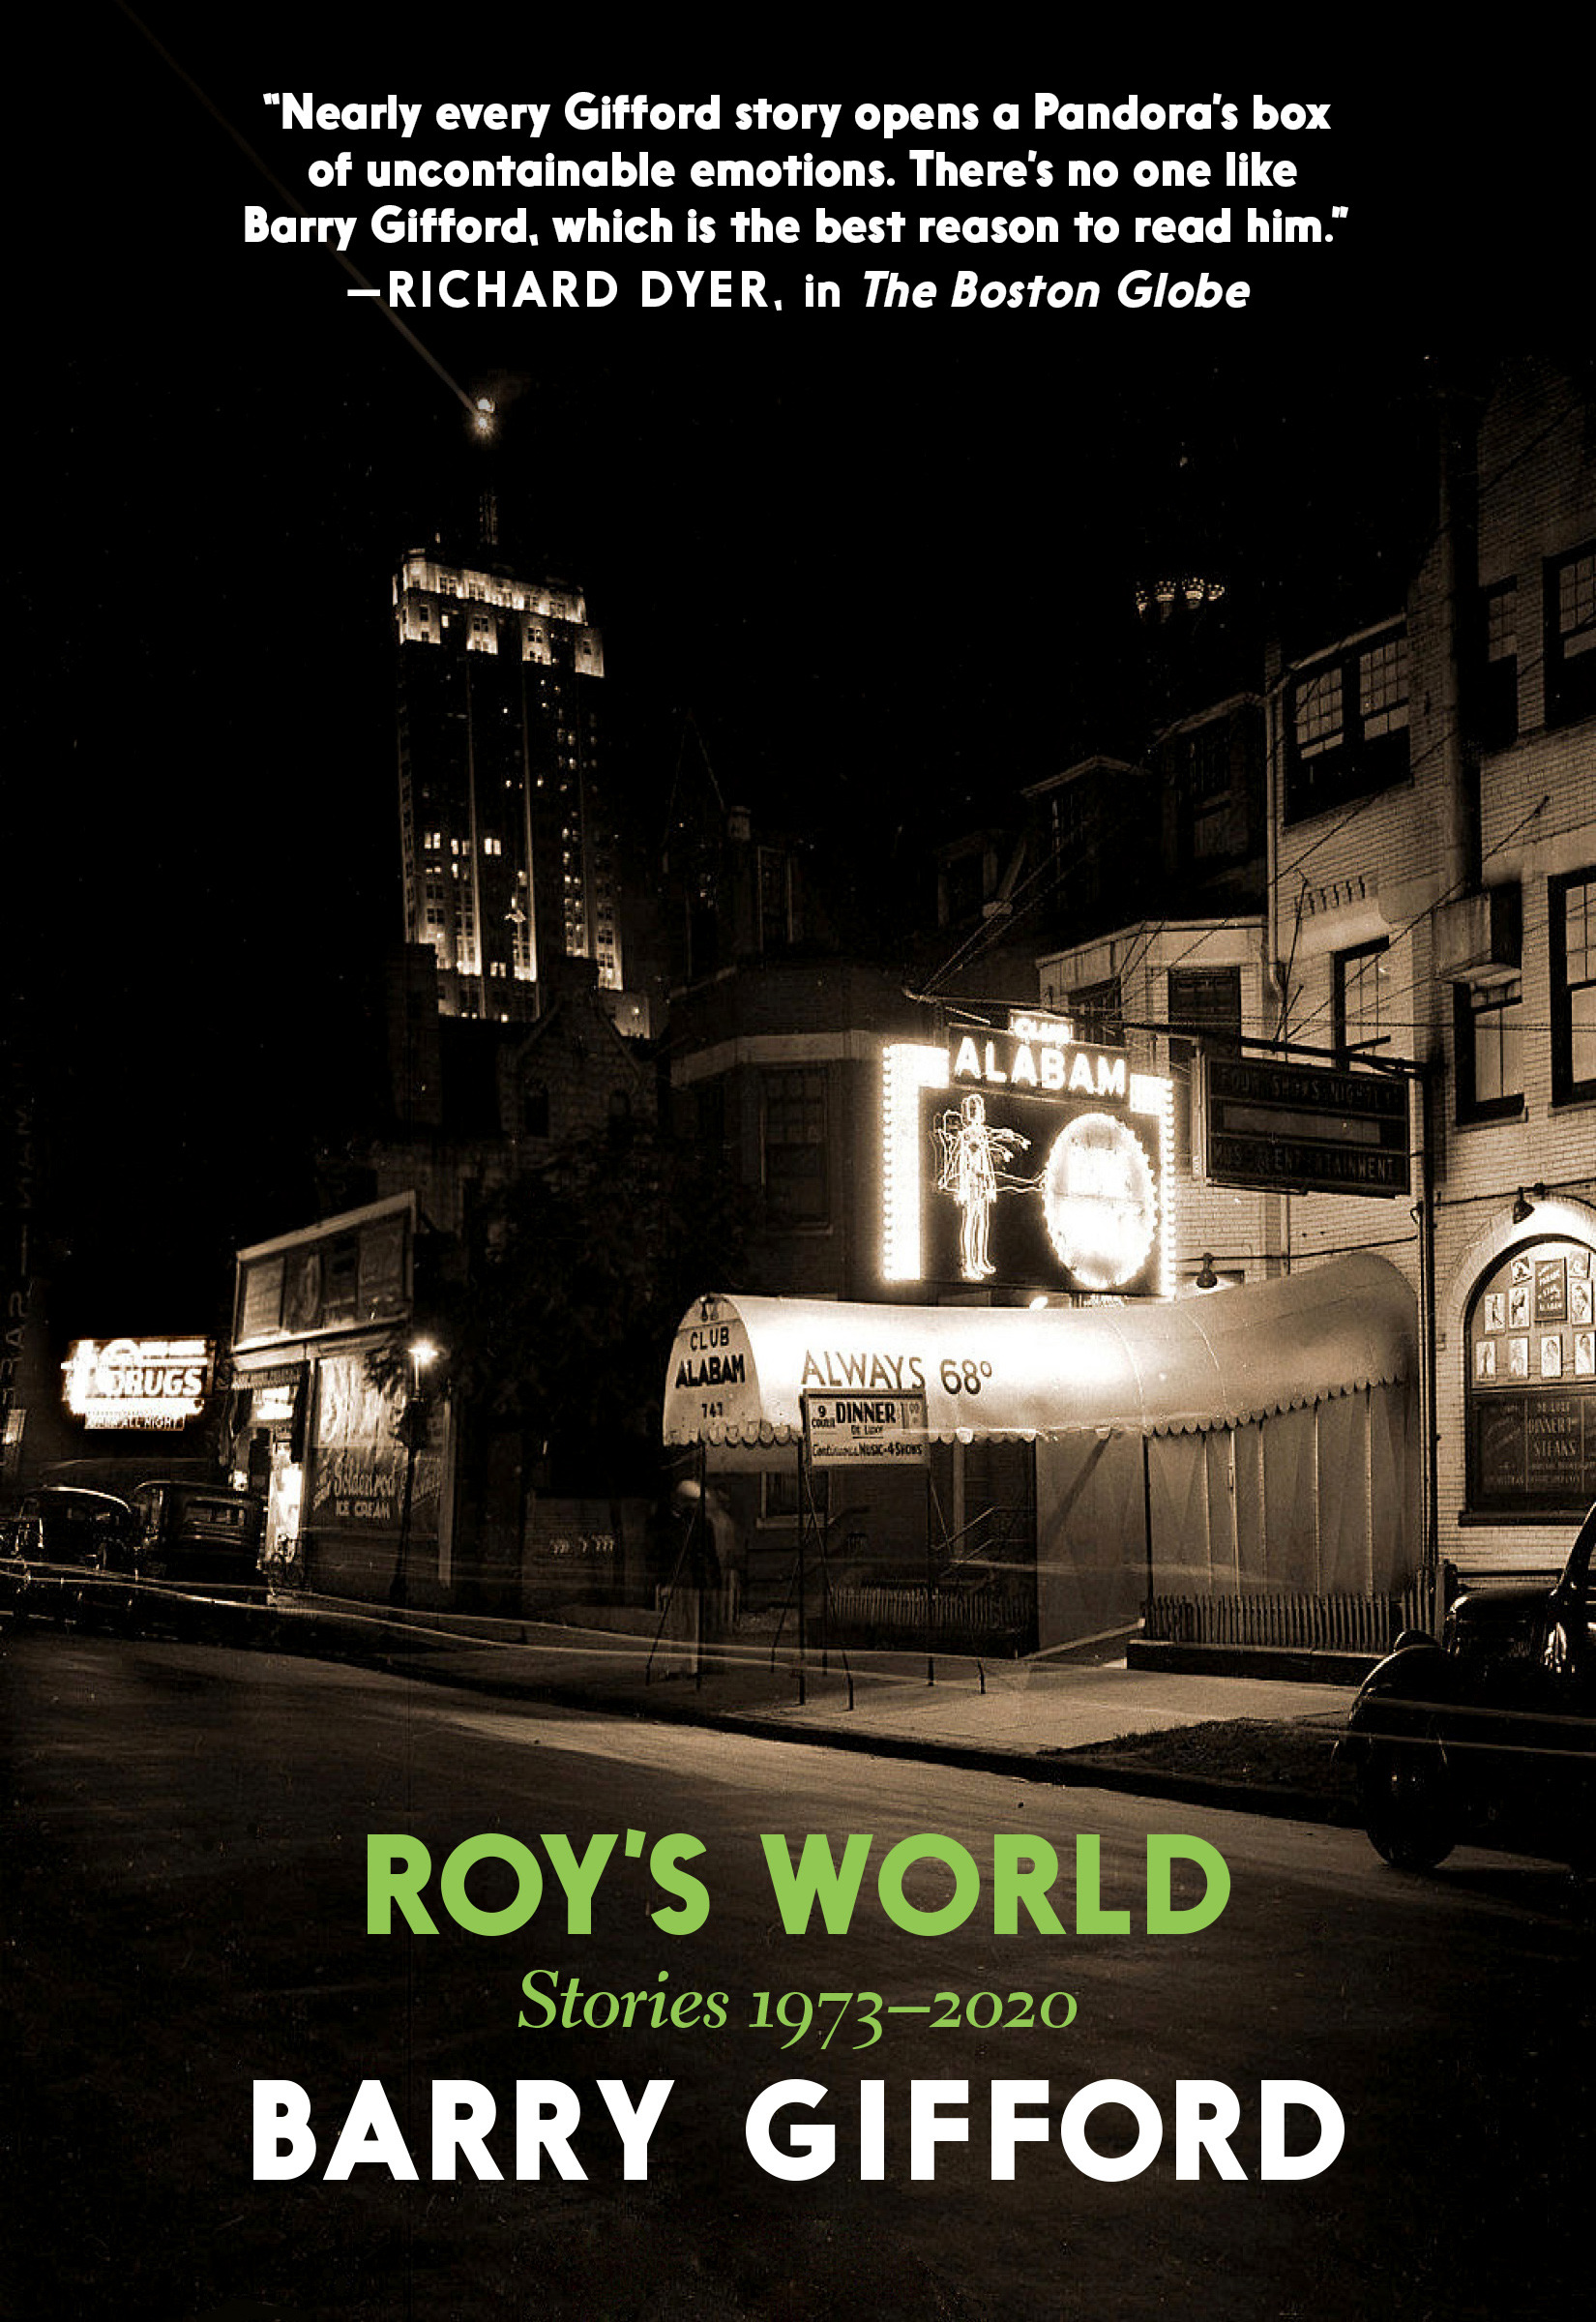 Virtual Book Launch: Roy's World by Barry Gifford in conversation with Willy Vlautin